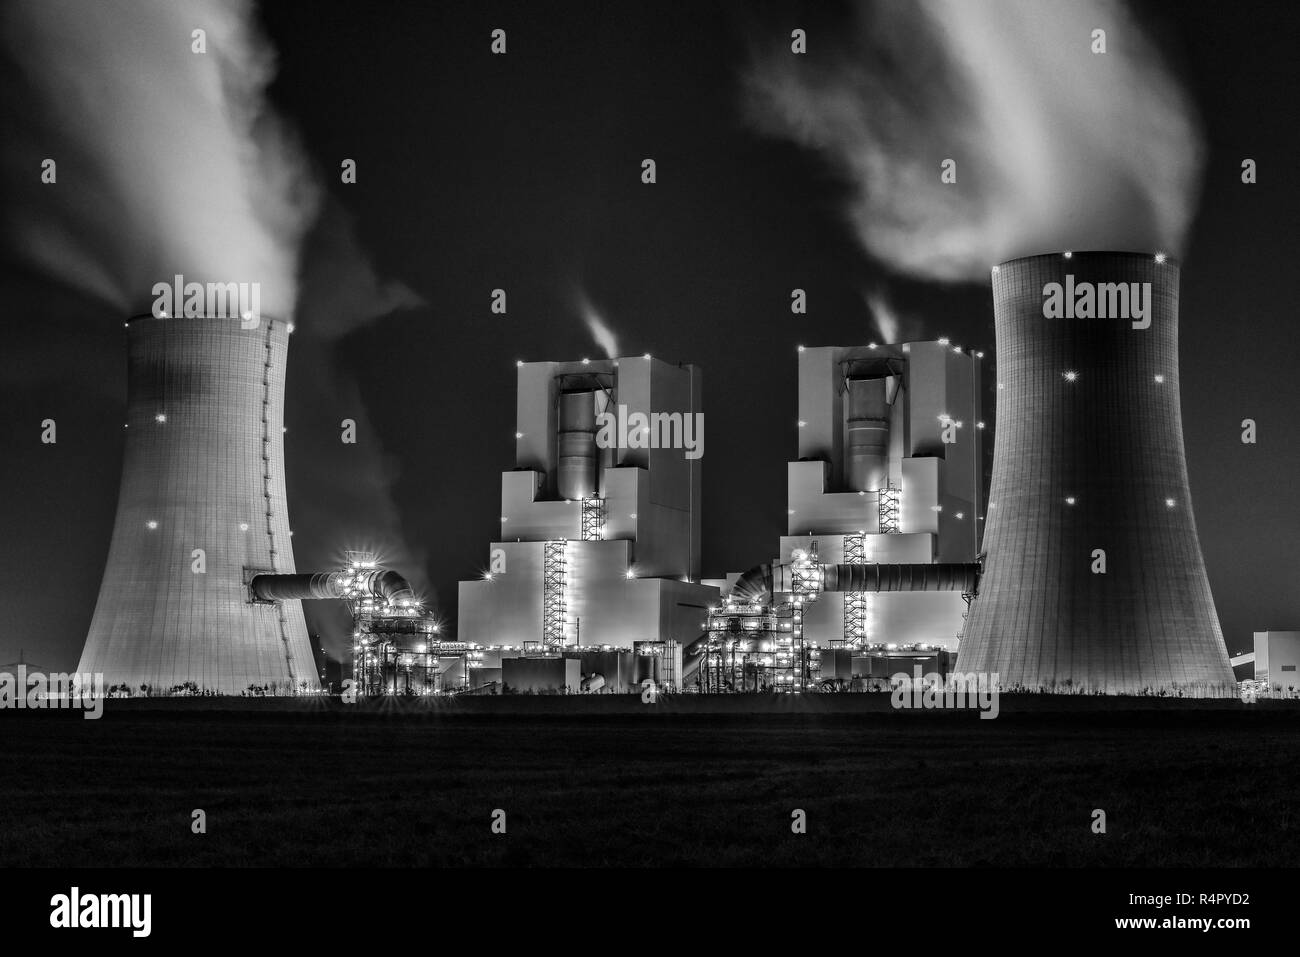 night shot of illuminated lignite power station with cooling towers Stock Photo